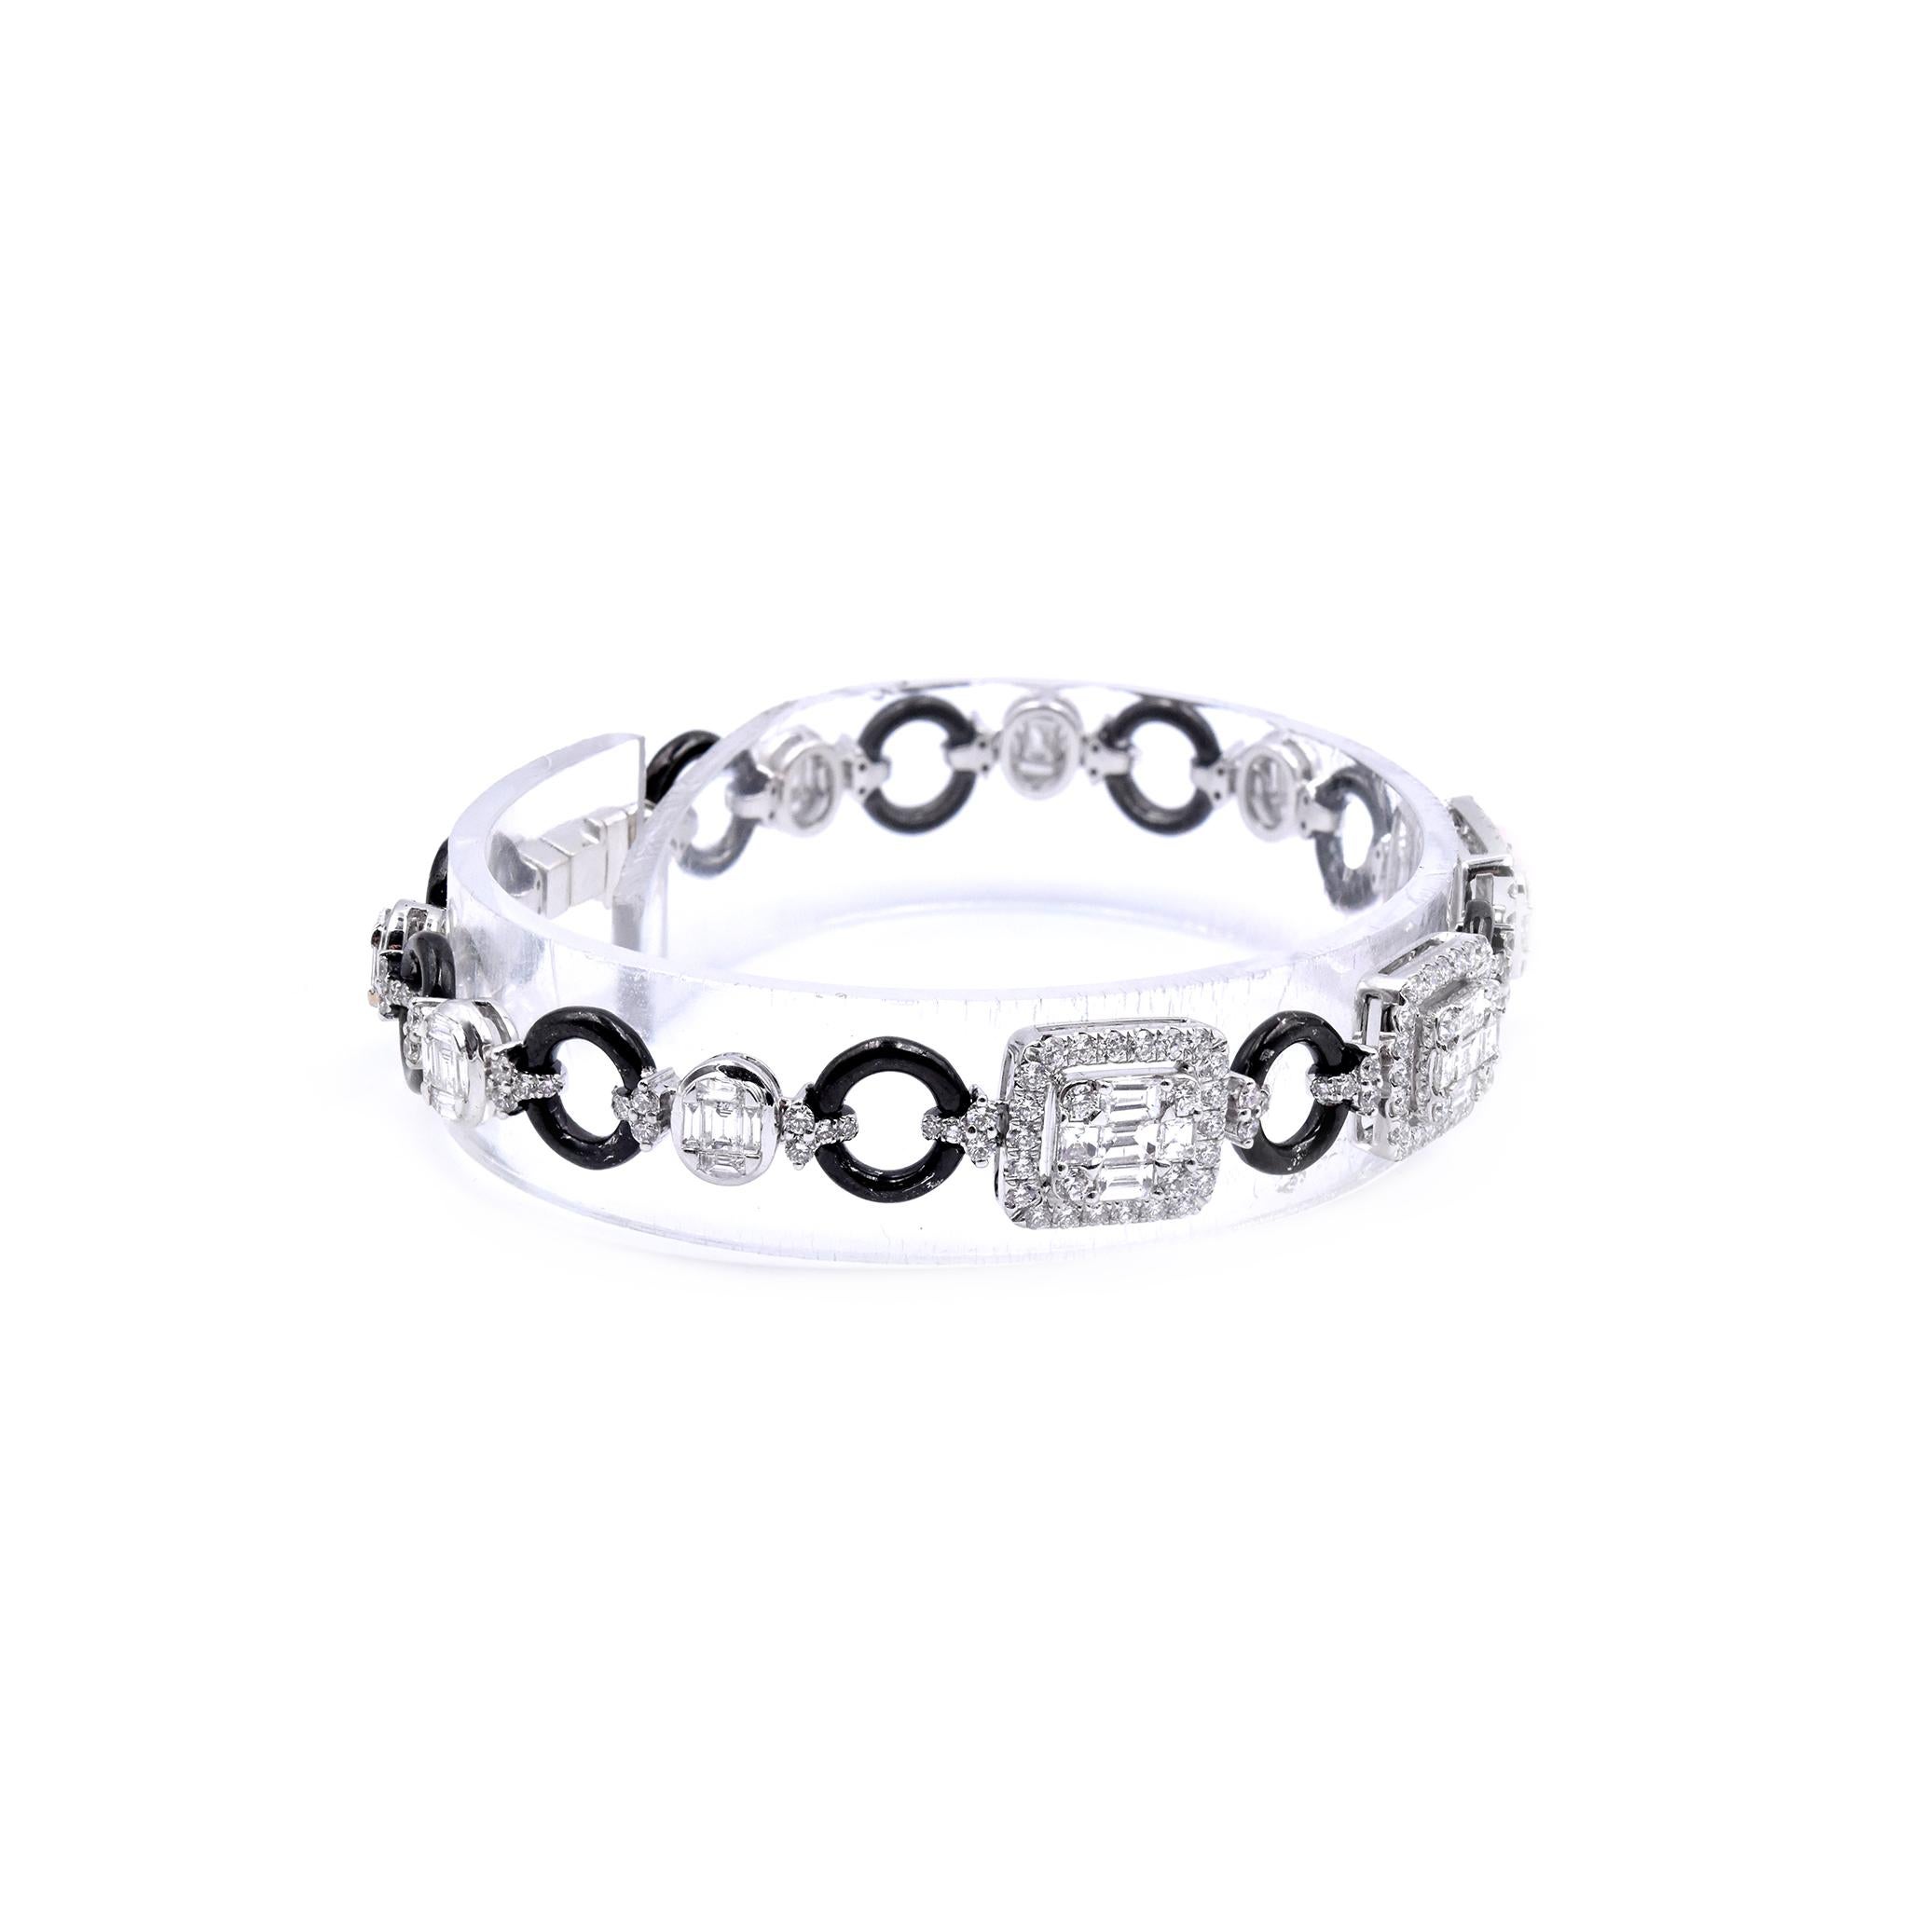 Material: 18K white gold
Diamonds: 162 round cut = 1.63cttw
Color: G
Clarity: VS1
Diamonds: 45 baguette cut = 1.57cttw
Color: G
Clarity: VS
Dimensions: bracelet will fit up to a 7-inch wrist
Weight: 14.82 grams
